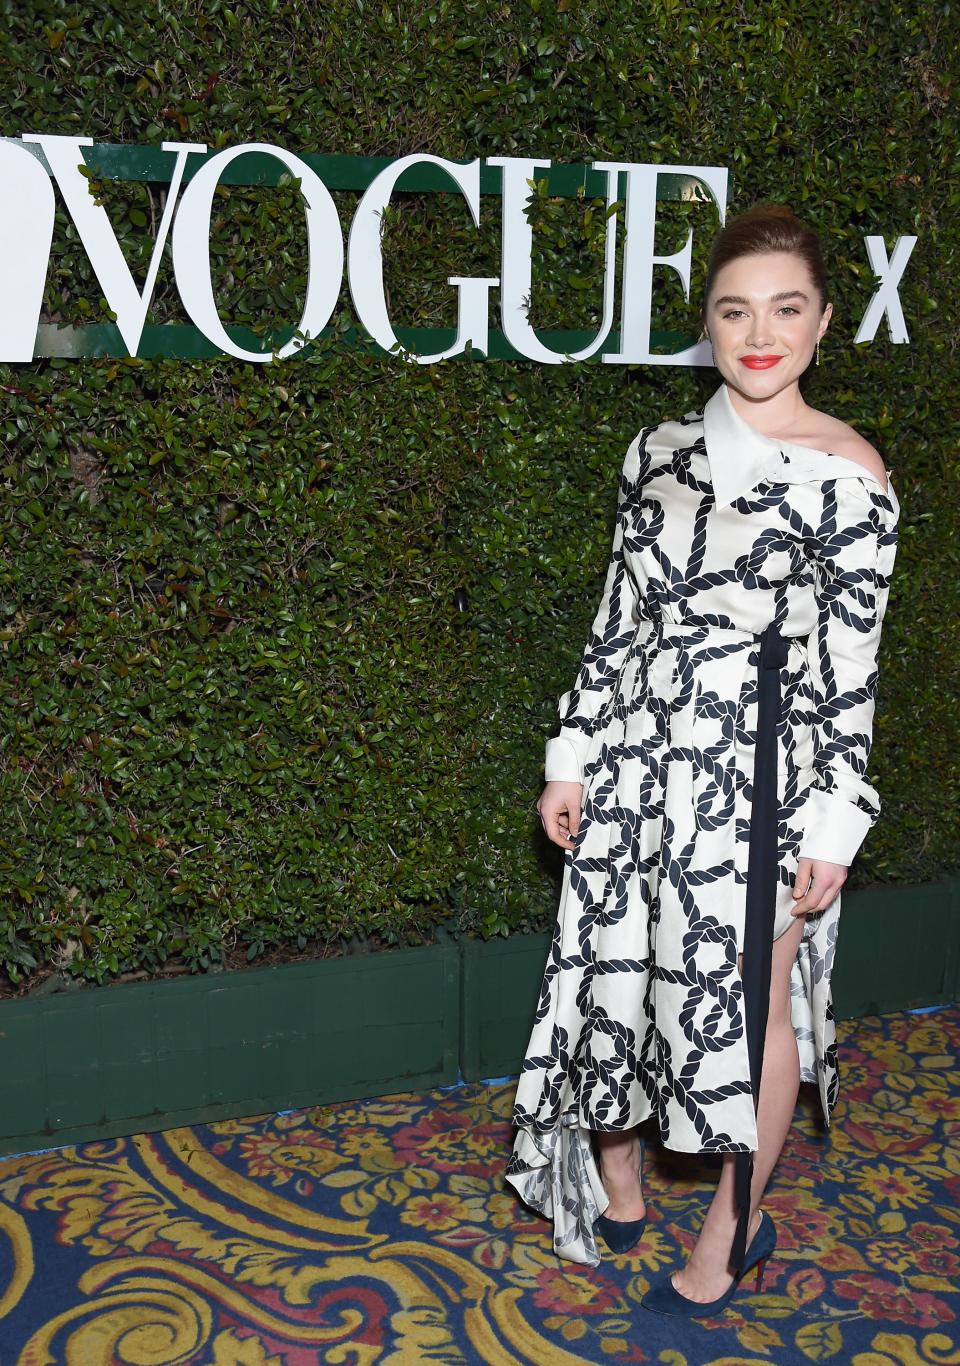 Young Hollywood Class of 2019 member Florence Pugh was all smiles.